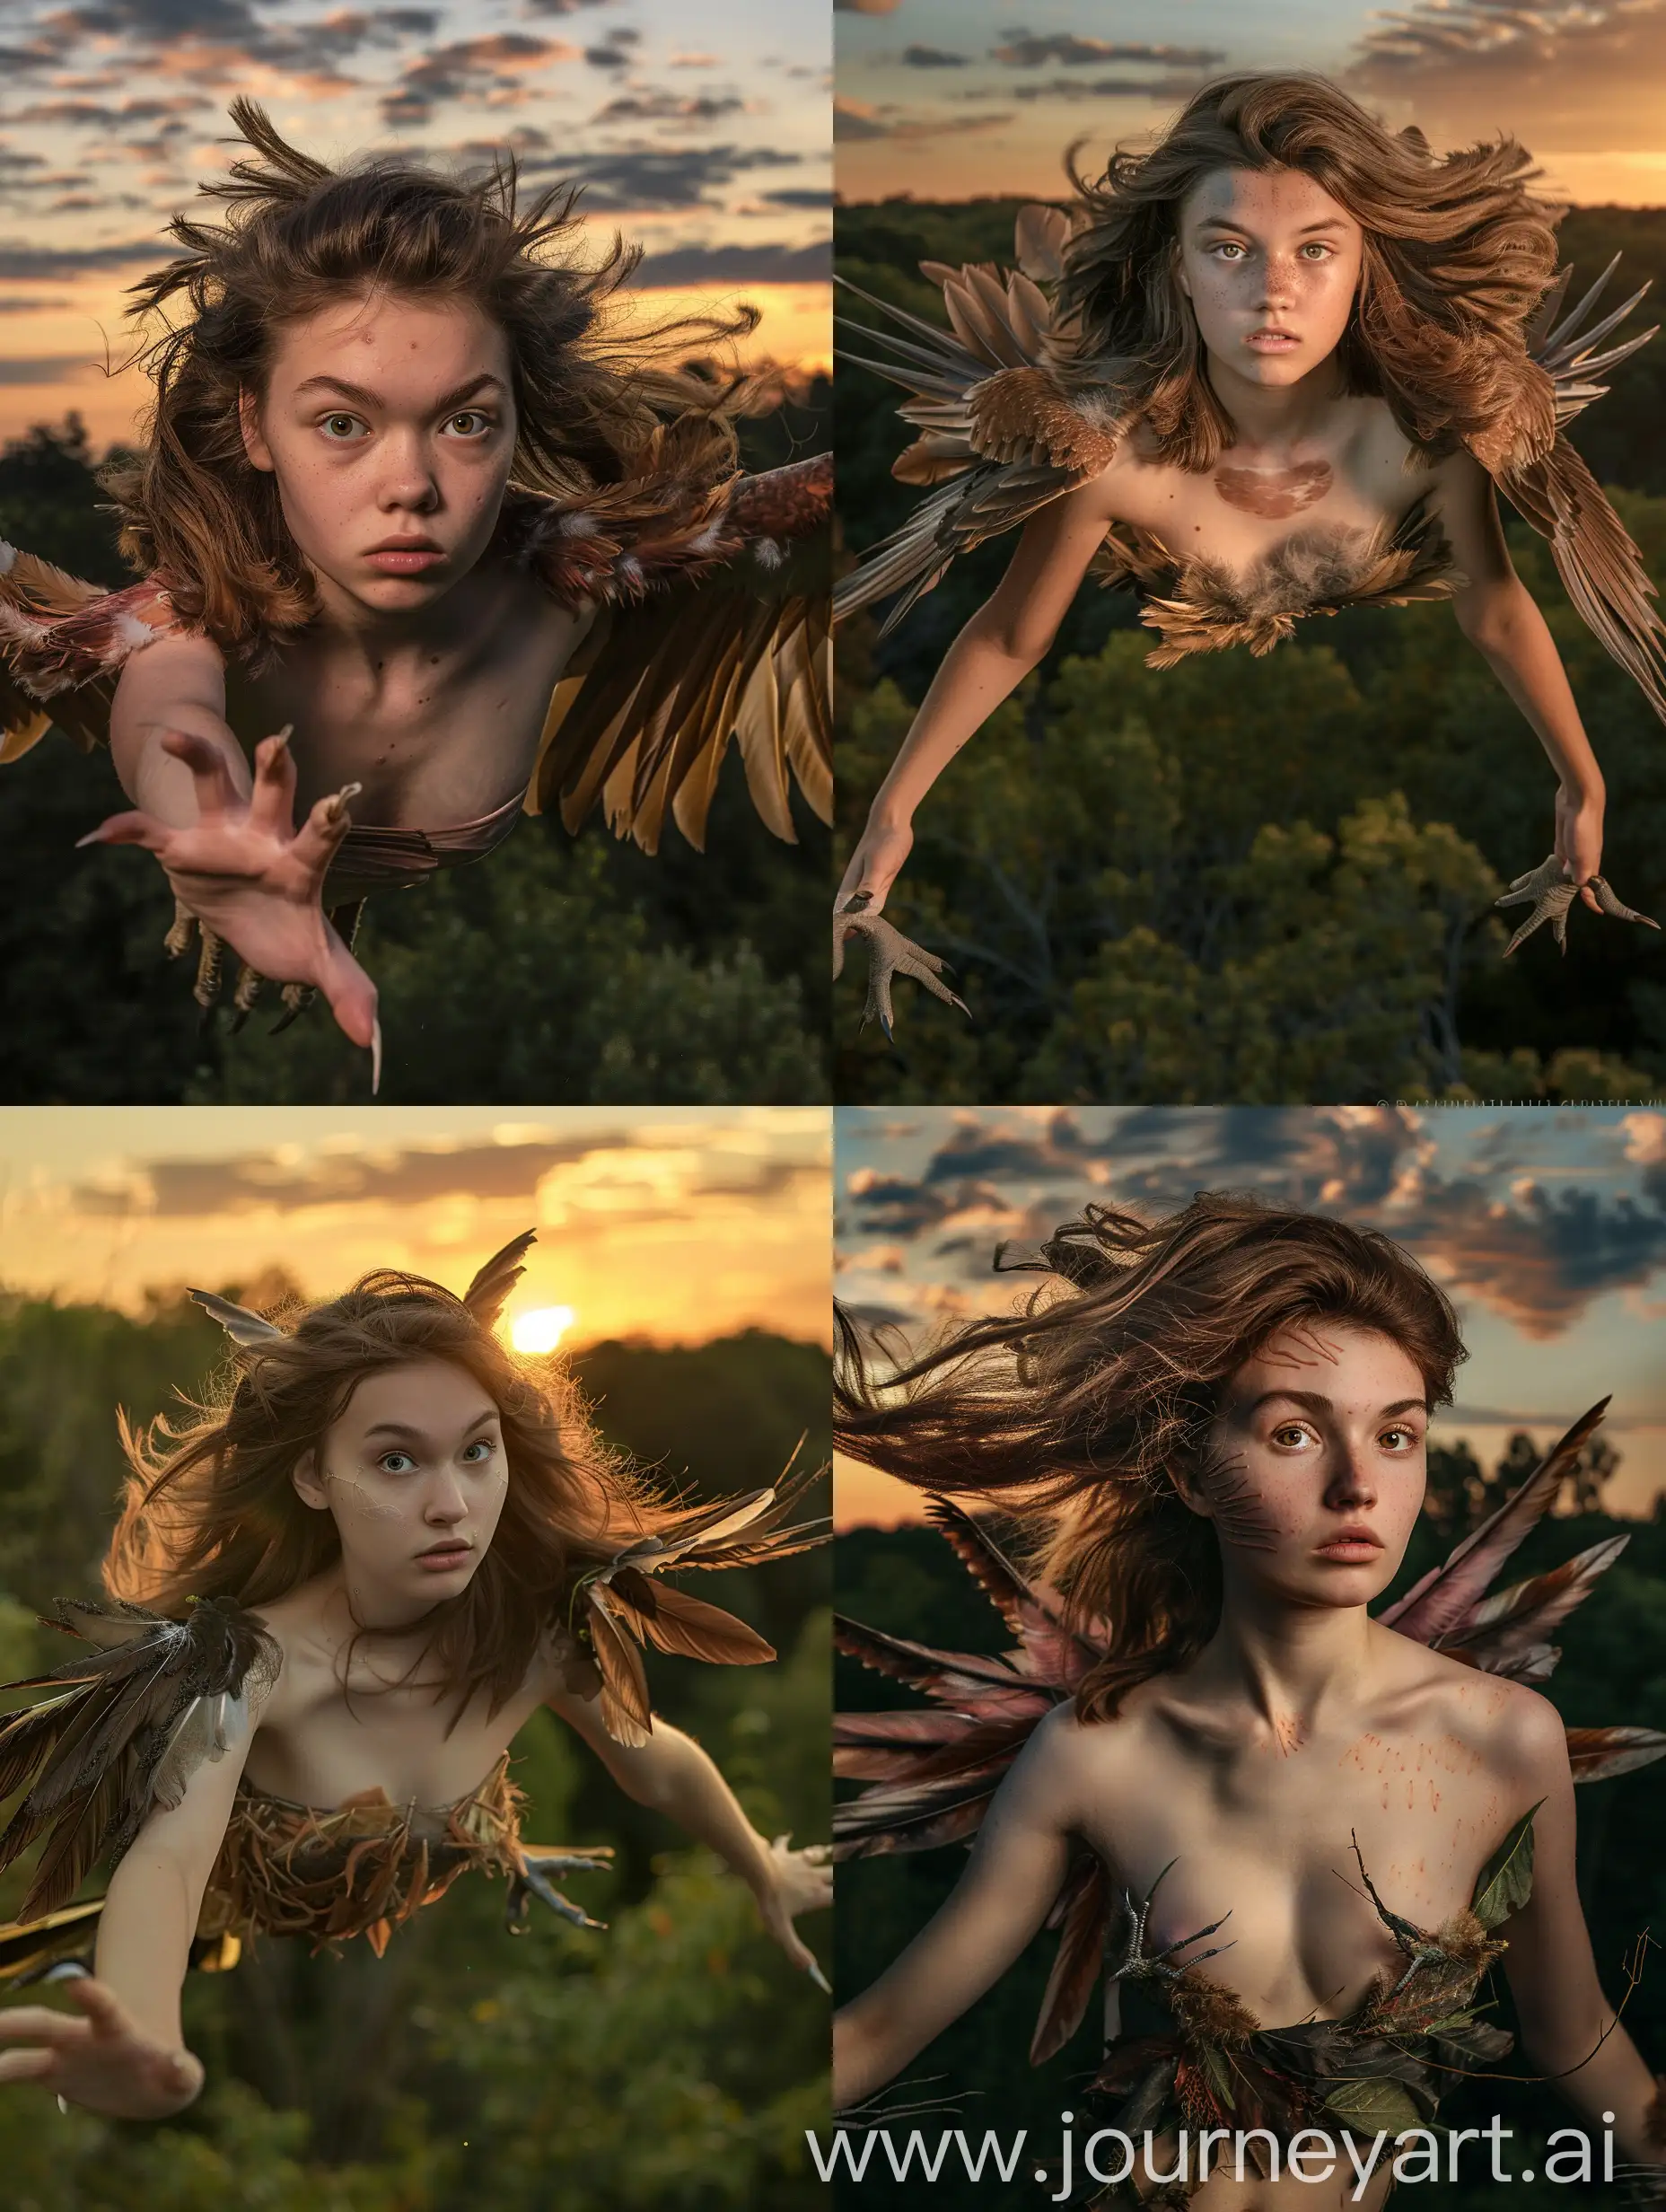 Elegant-Transformation-BrownHaired-Woman-Soars-as-a-Majestic-Robin-over-Sunset-Forest